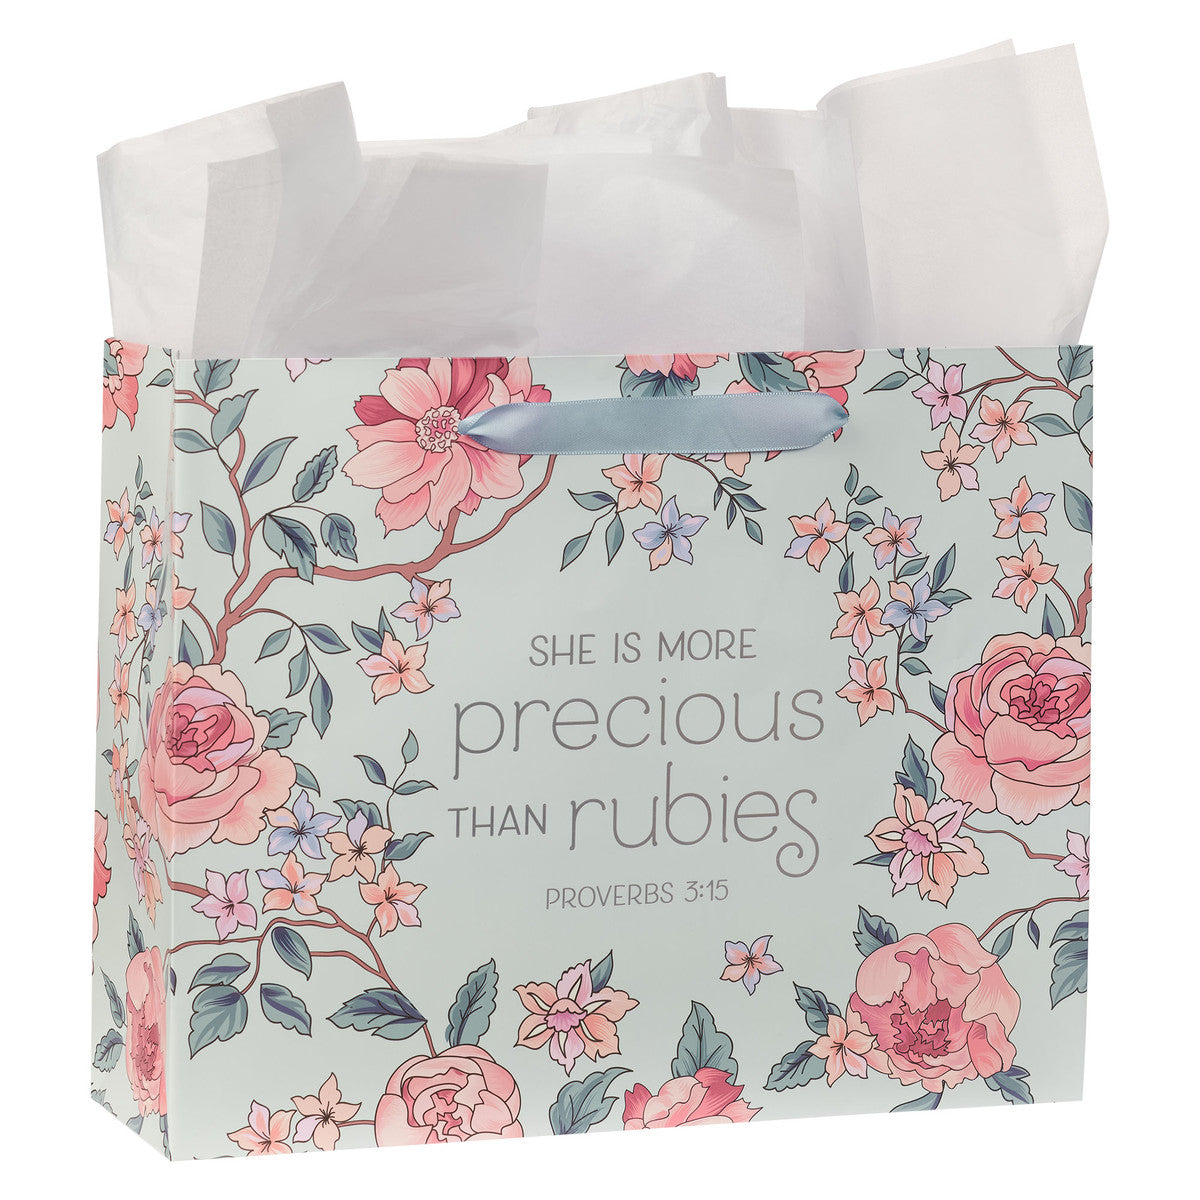 More Precious Than Rubies Pink Floral Large Landscape Bag with Card - Proverbs 5:13